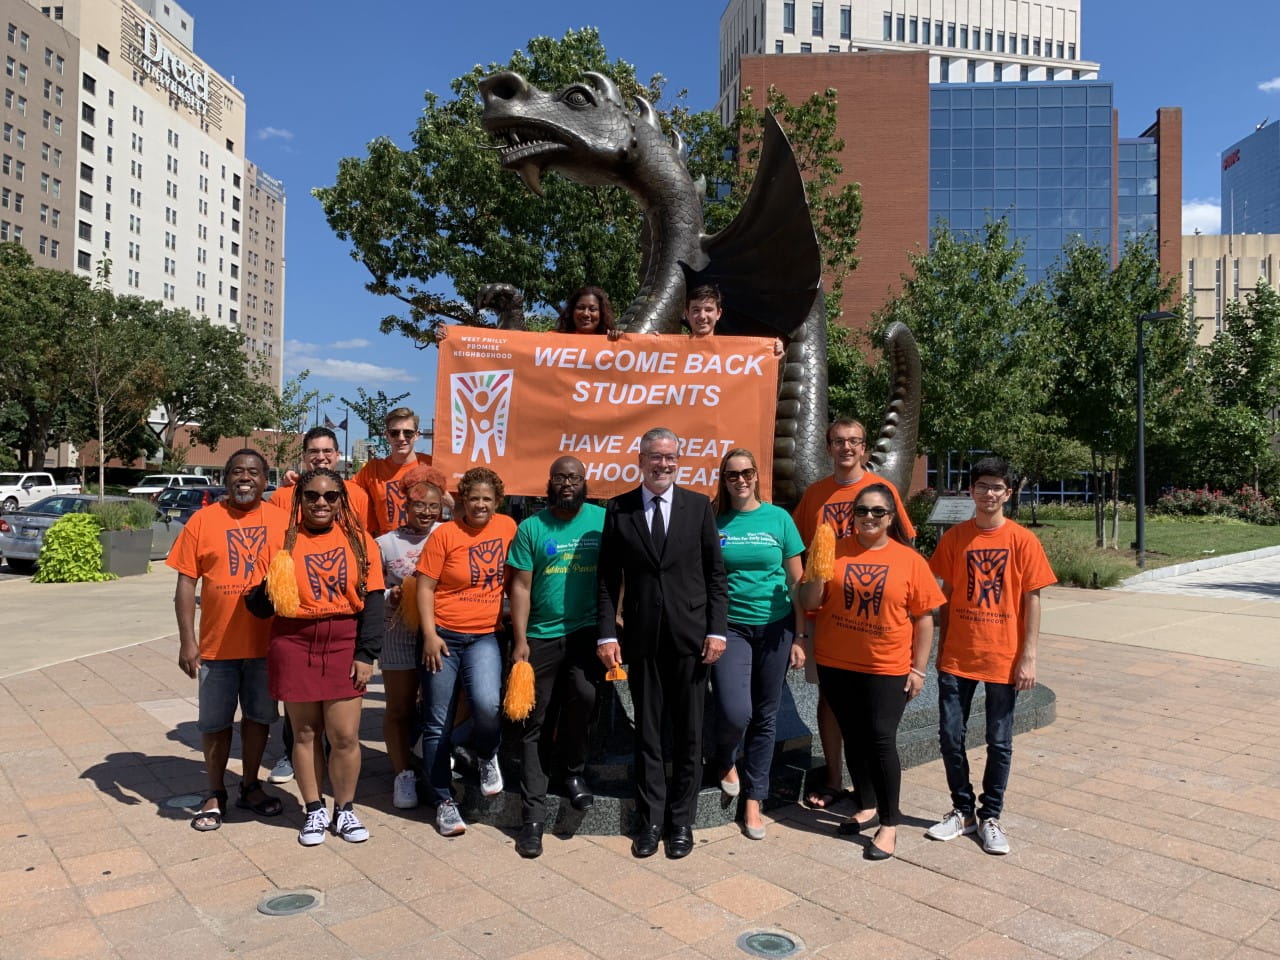 President John Fry posing in front of Mario the Dragon statue next to members of the West Philly Promise Neighborhood school team.